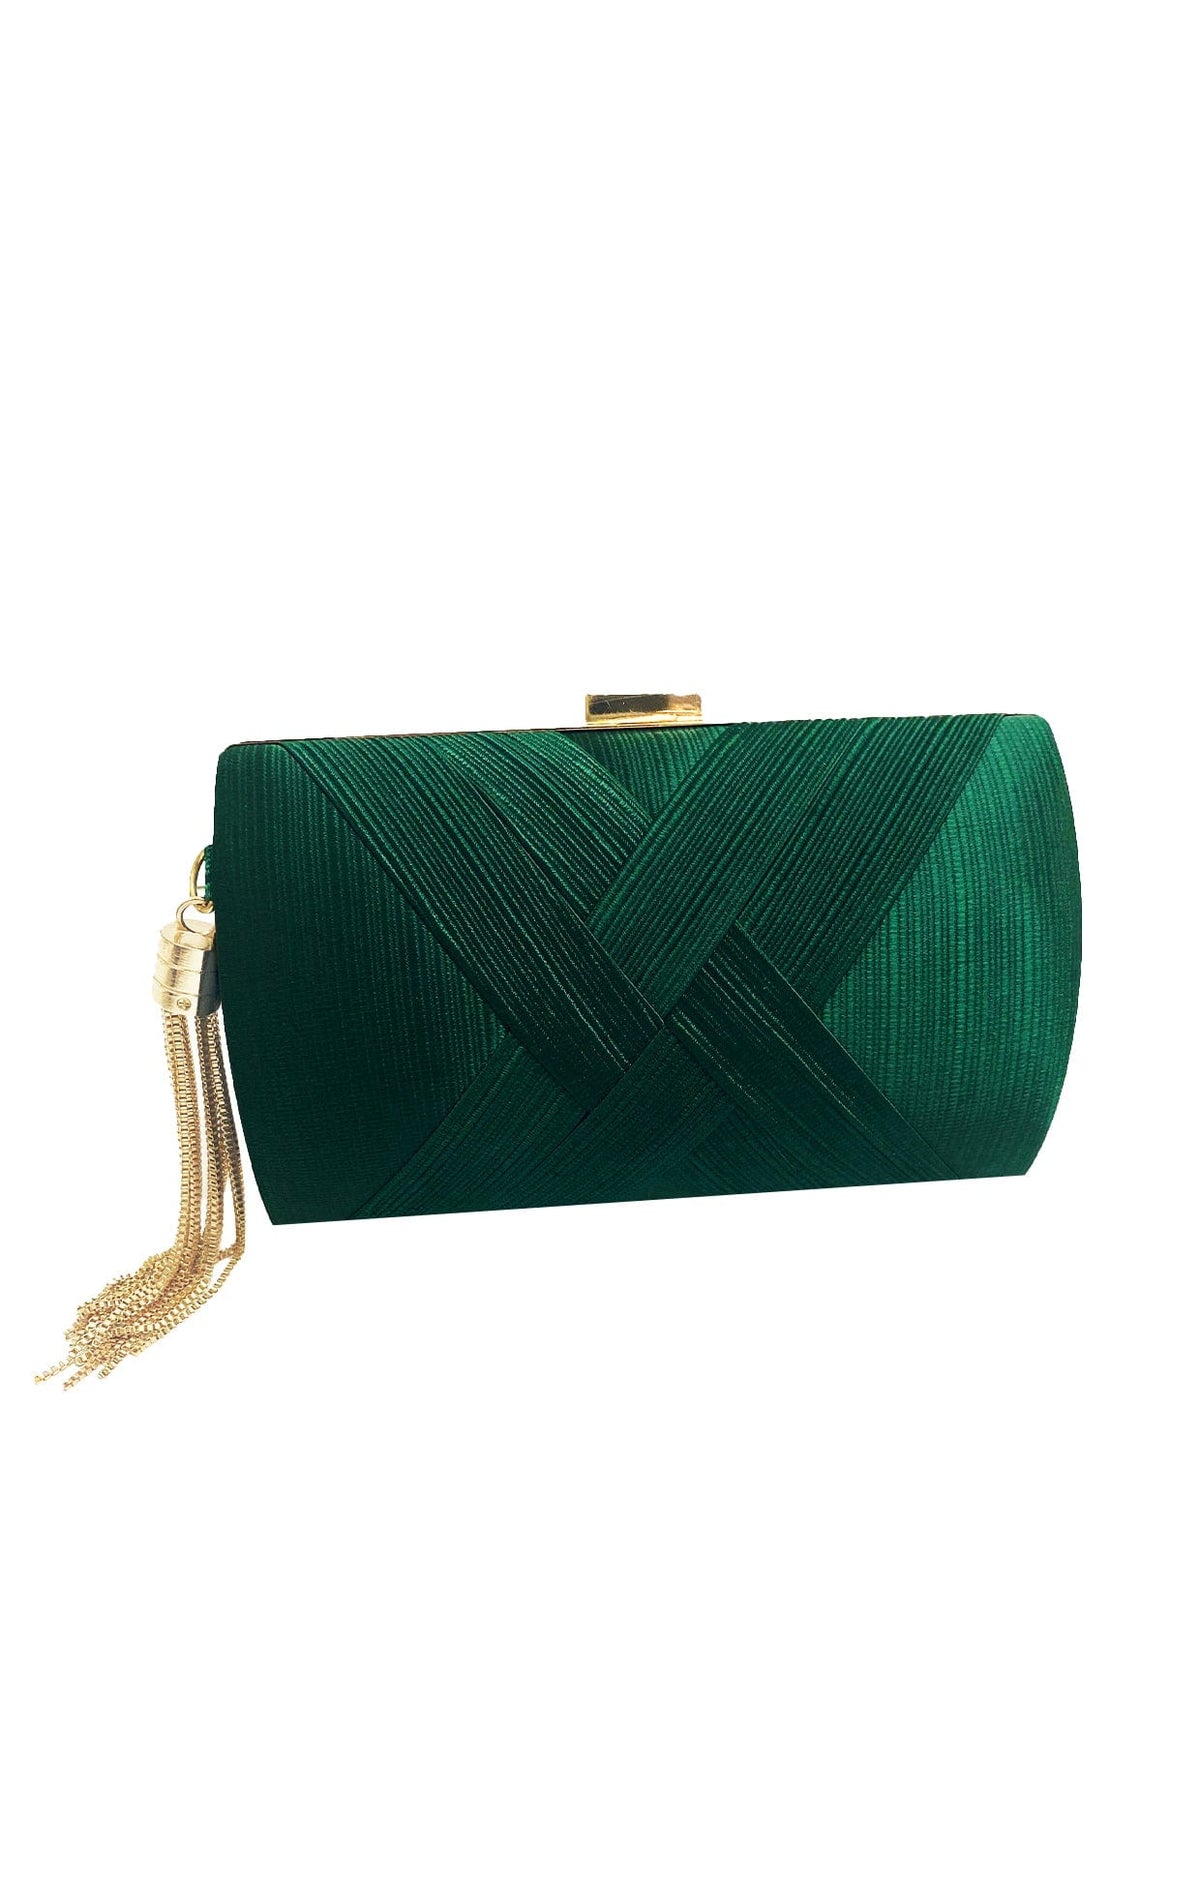 ACCESSORIES Bags Clutches One Size / Green DEANNA EVENING BAG IN EMERALD